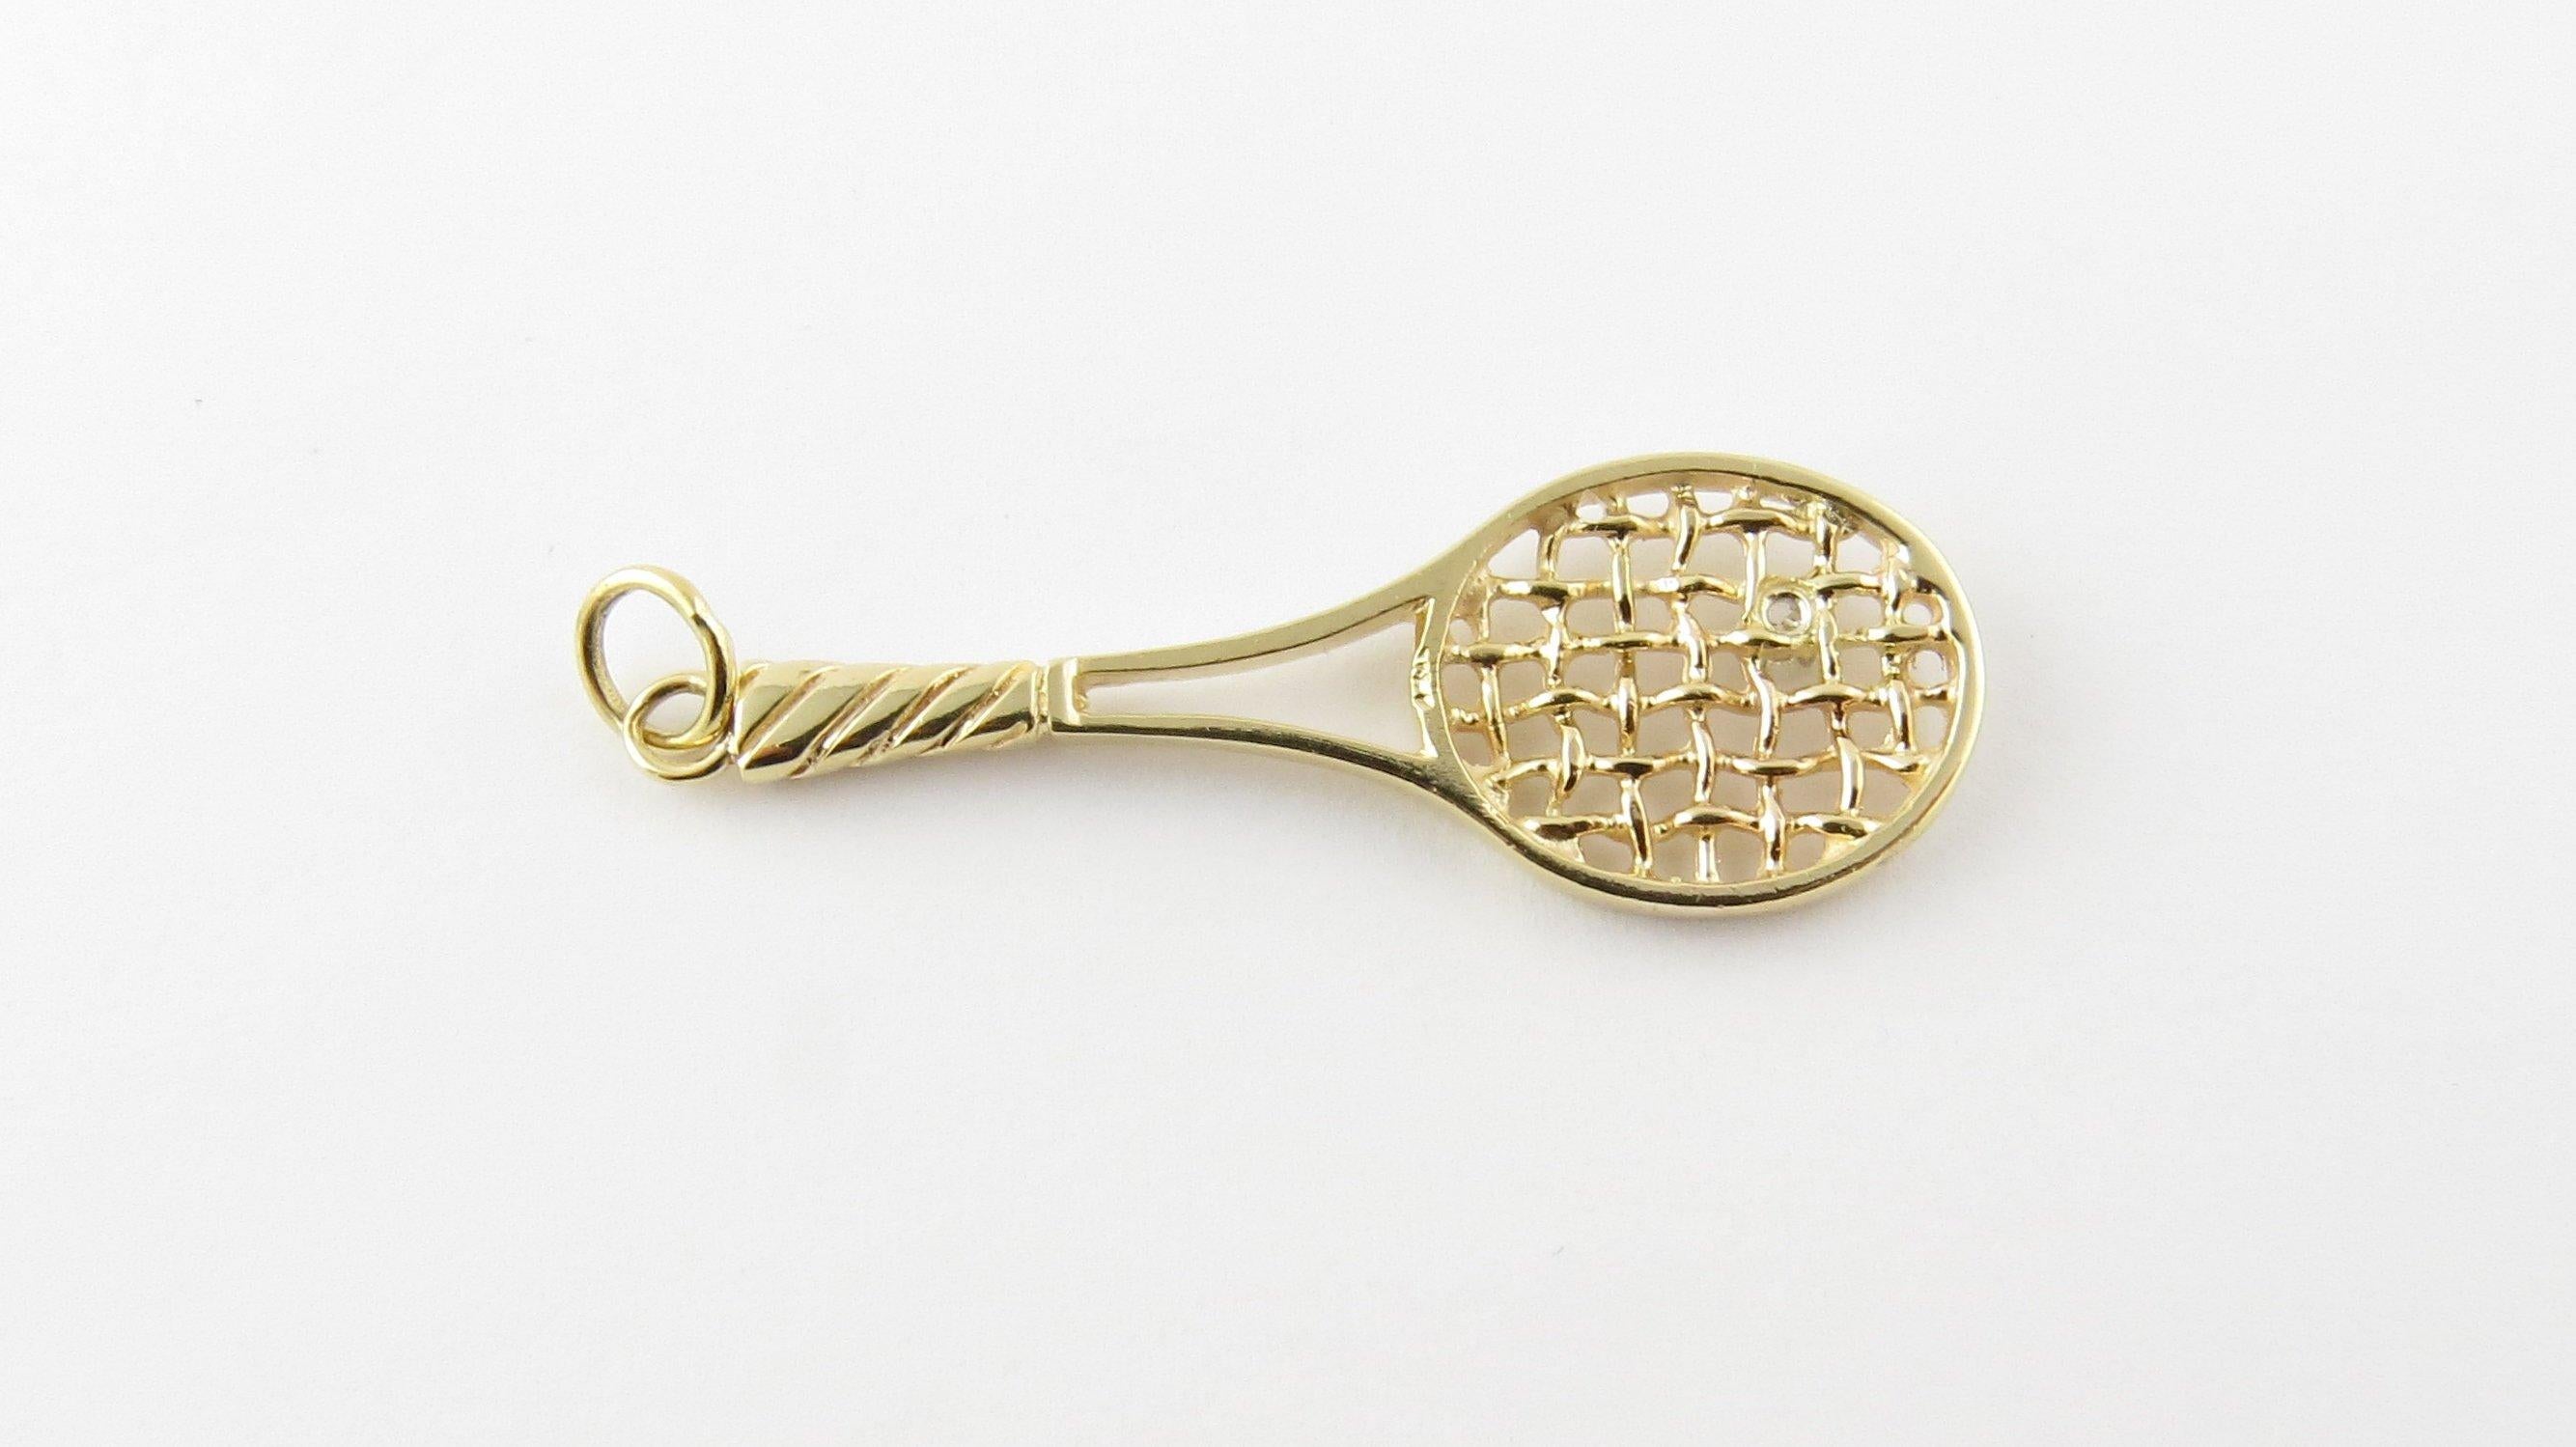 Vintage 14 Karat Yellow Gold and Diamond Tennis Racket Pendant- Tennis anyone? This lovely 3D pendant features a beautifully detailed tennis racket accented with one round brilliant cut diamond. Approximate total diamond weight: .03 ct. Diamond